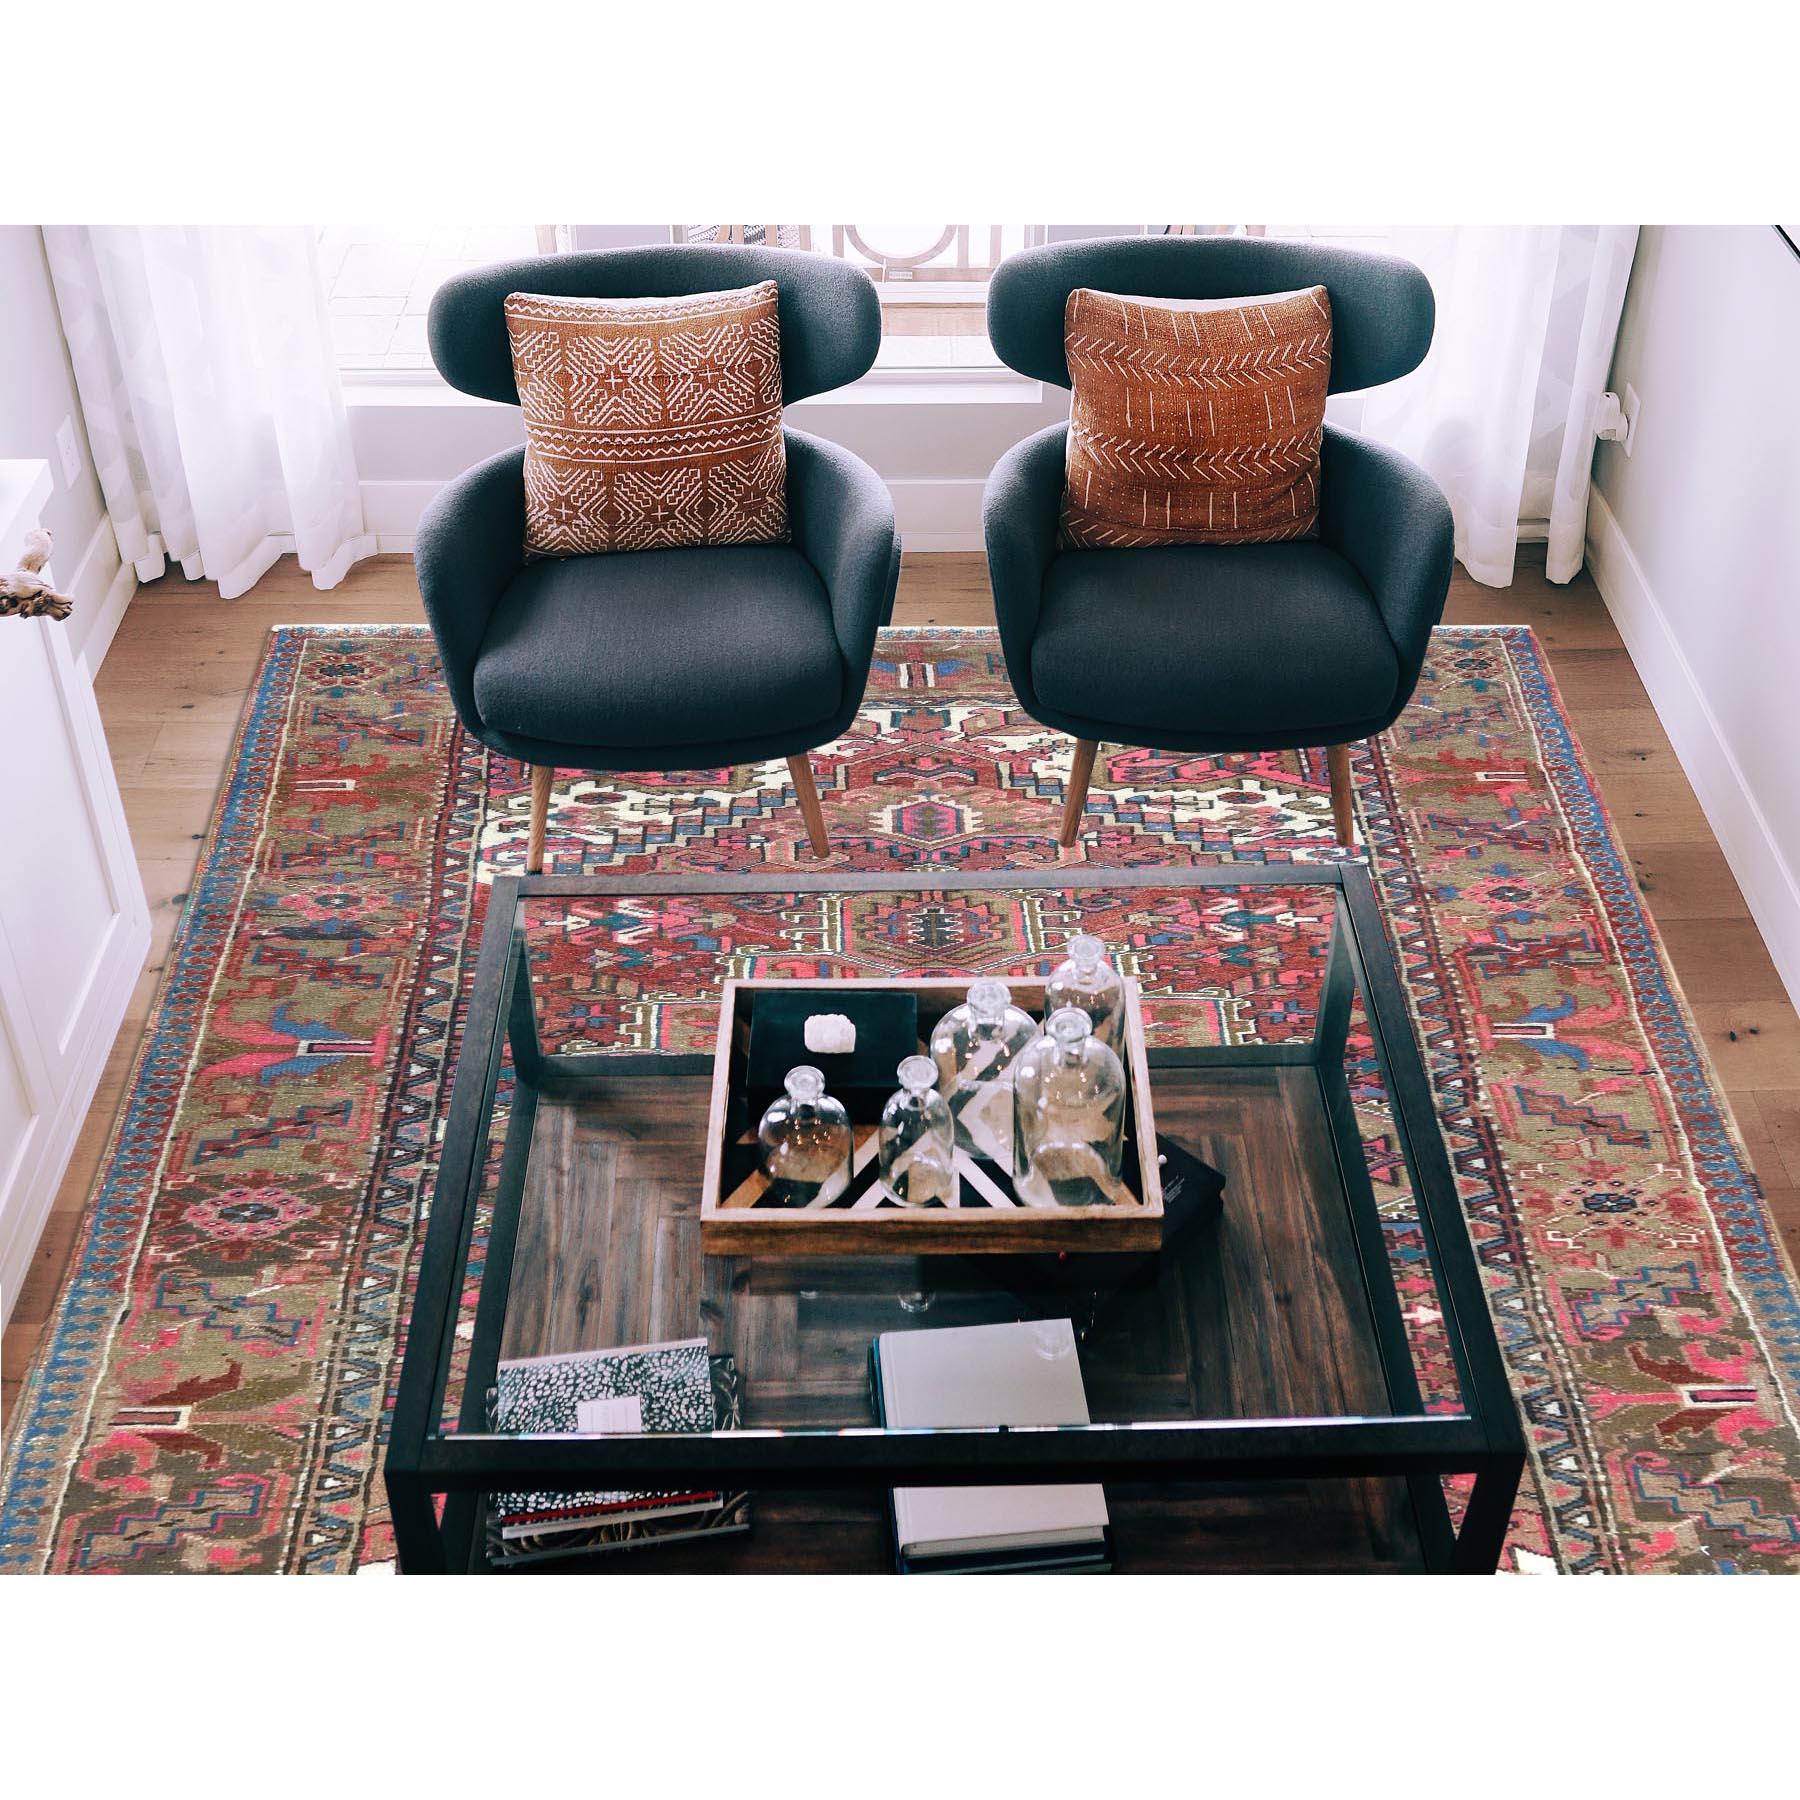 This fabulous Hand-Knotted carpet has been created and designed for extra strength and durability. This rug has been handcrafted for weeks in the traditional method that is used to make
Exact Rug Size in Feet and Inches : 6'9